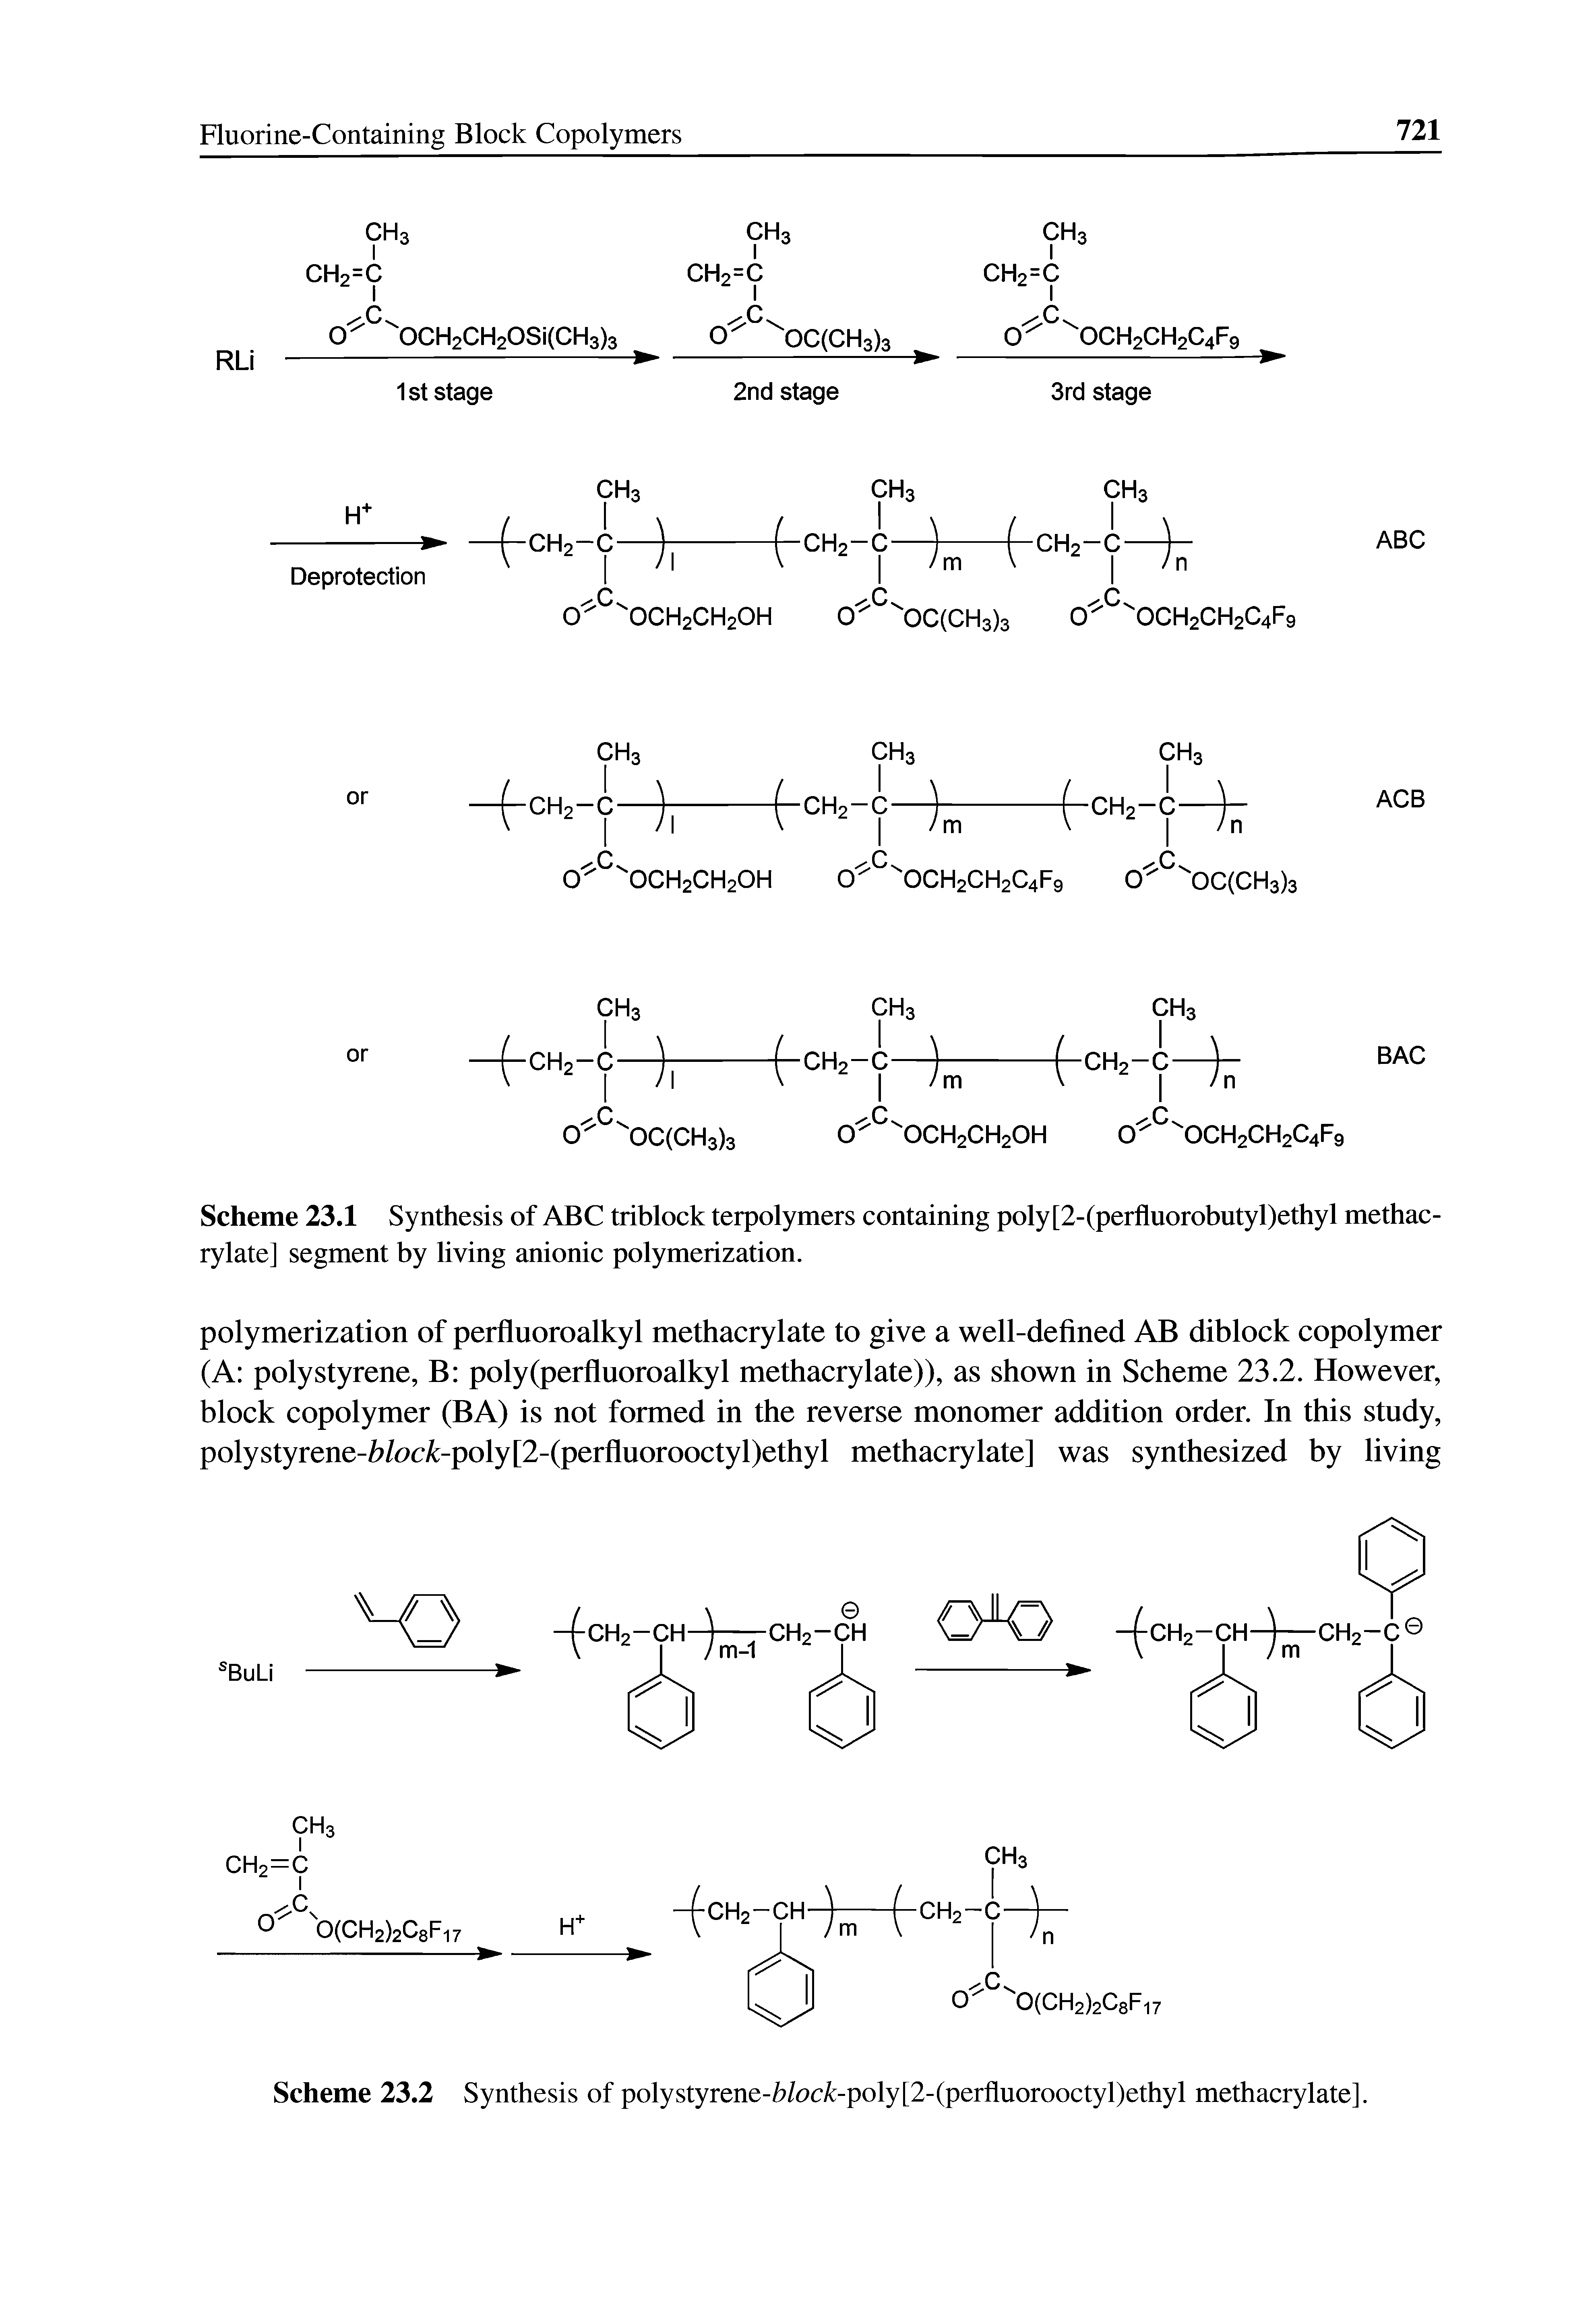 Scheme 23.1 Synthesis of ABC triblock terpolymers containing poly [2-(perfluorobutyl)ethyl methacrylate] segment by living anionic polymerization.